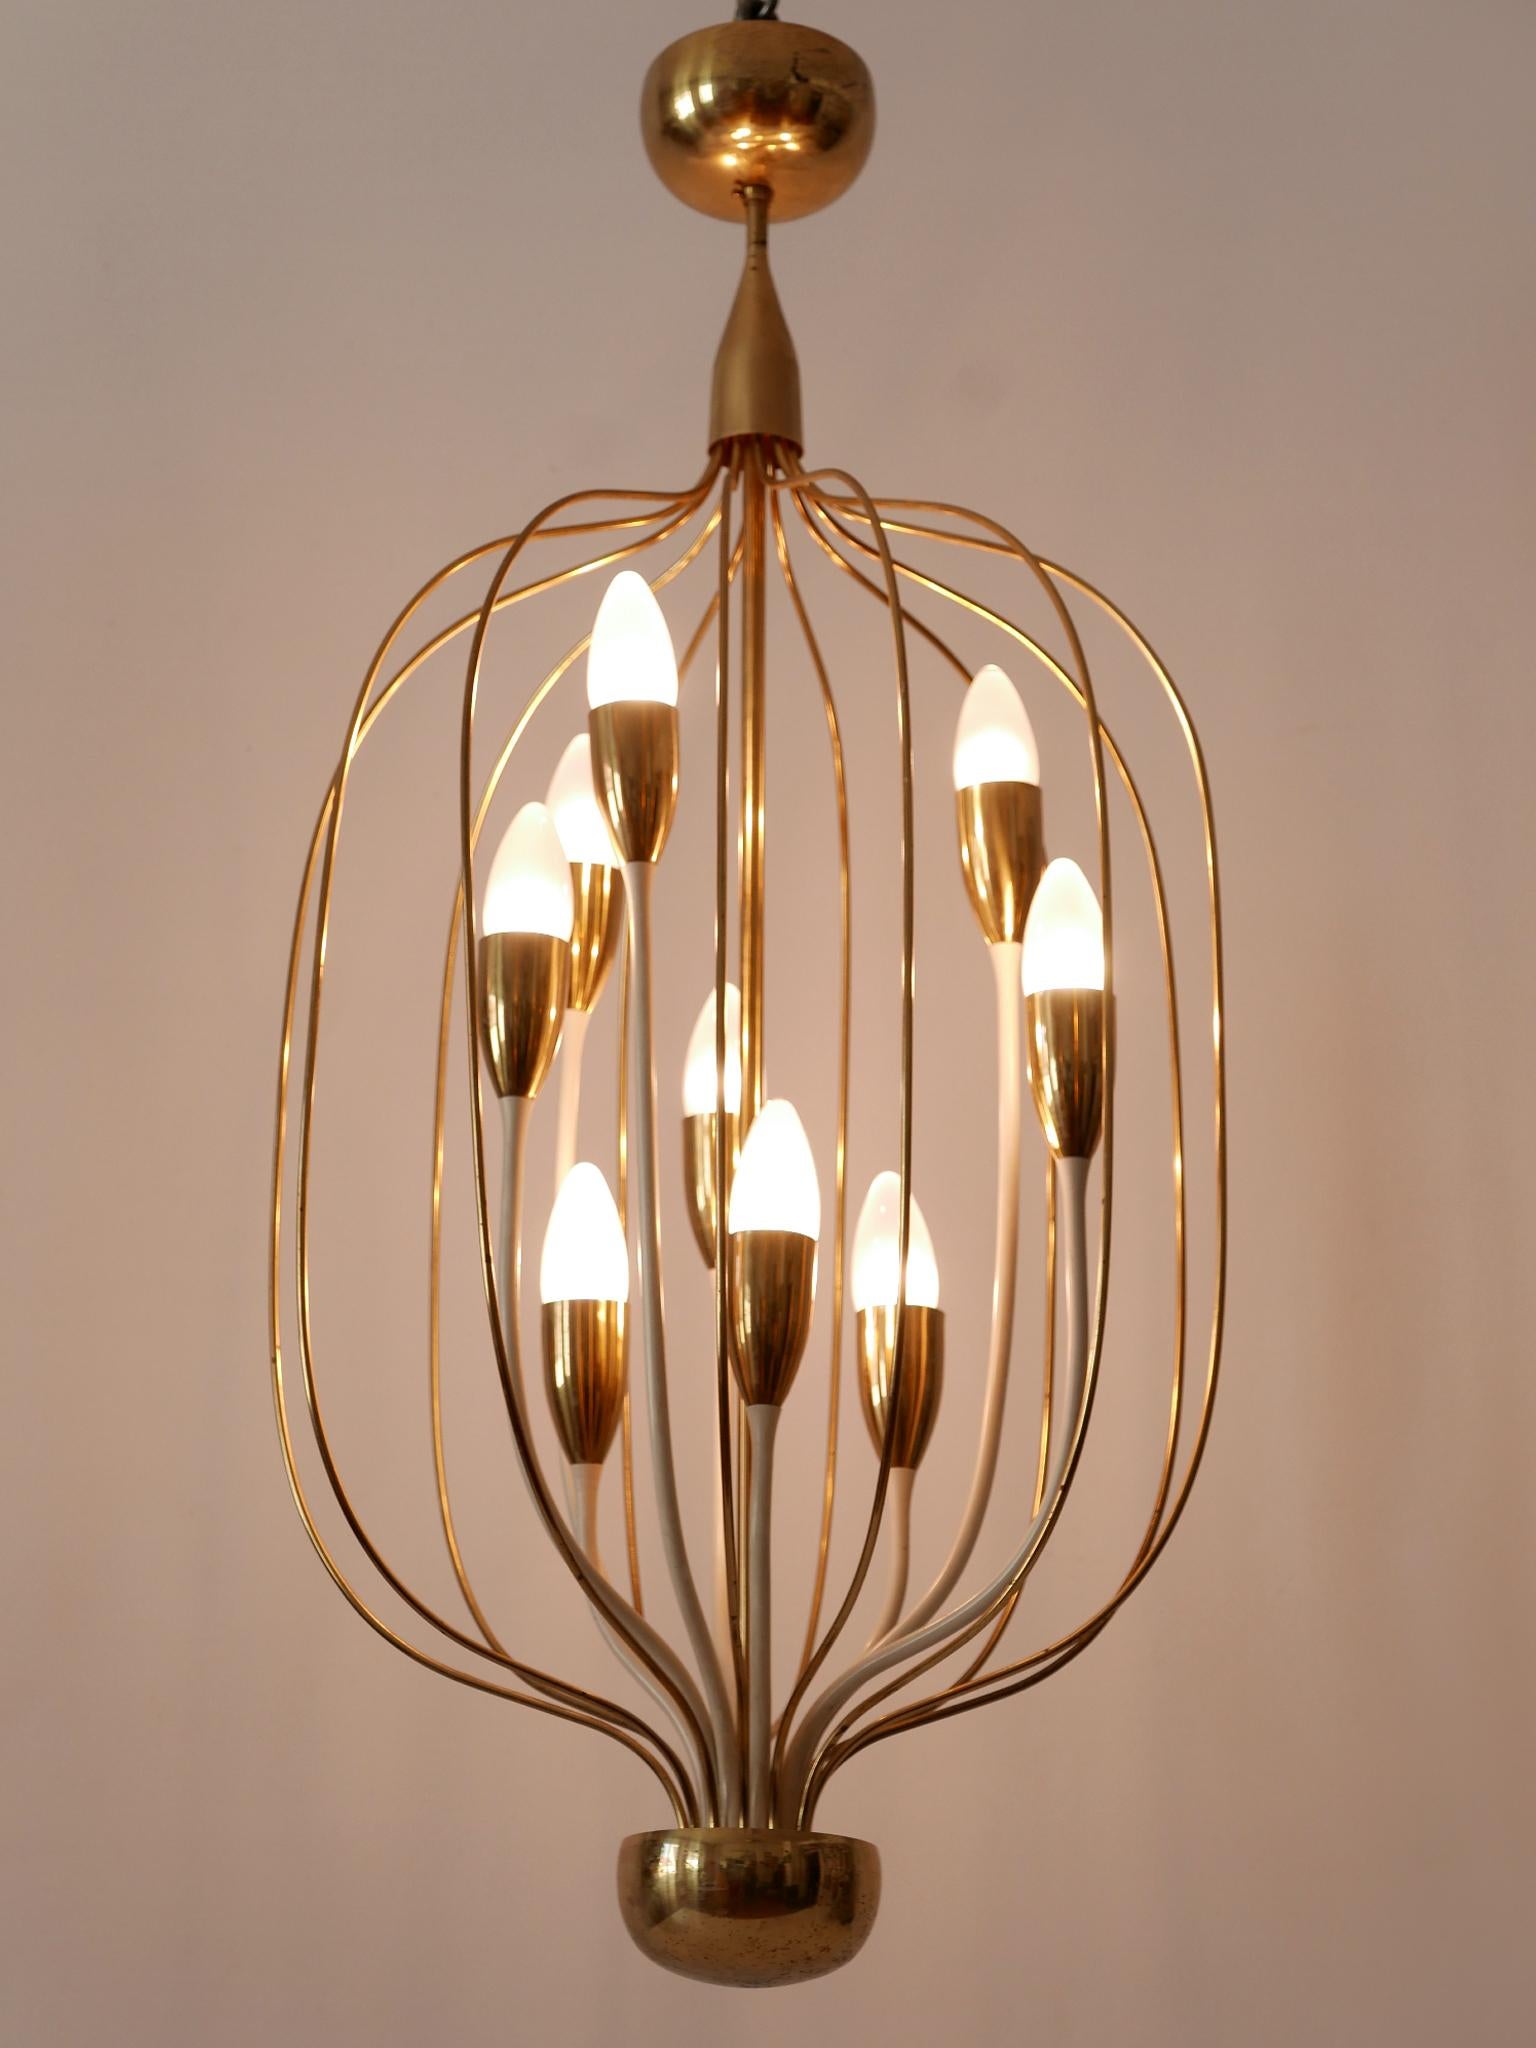 Exceptional Mid-Century Modern Nine-Flamed Chandelier or Pendant Lamp 1950s For Sale 5